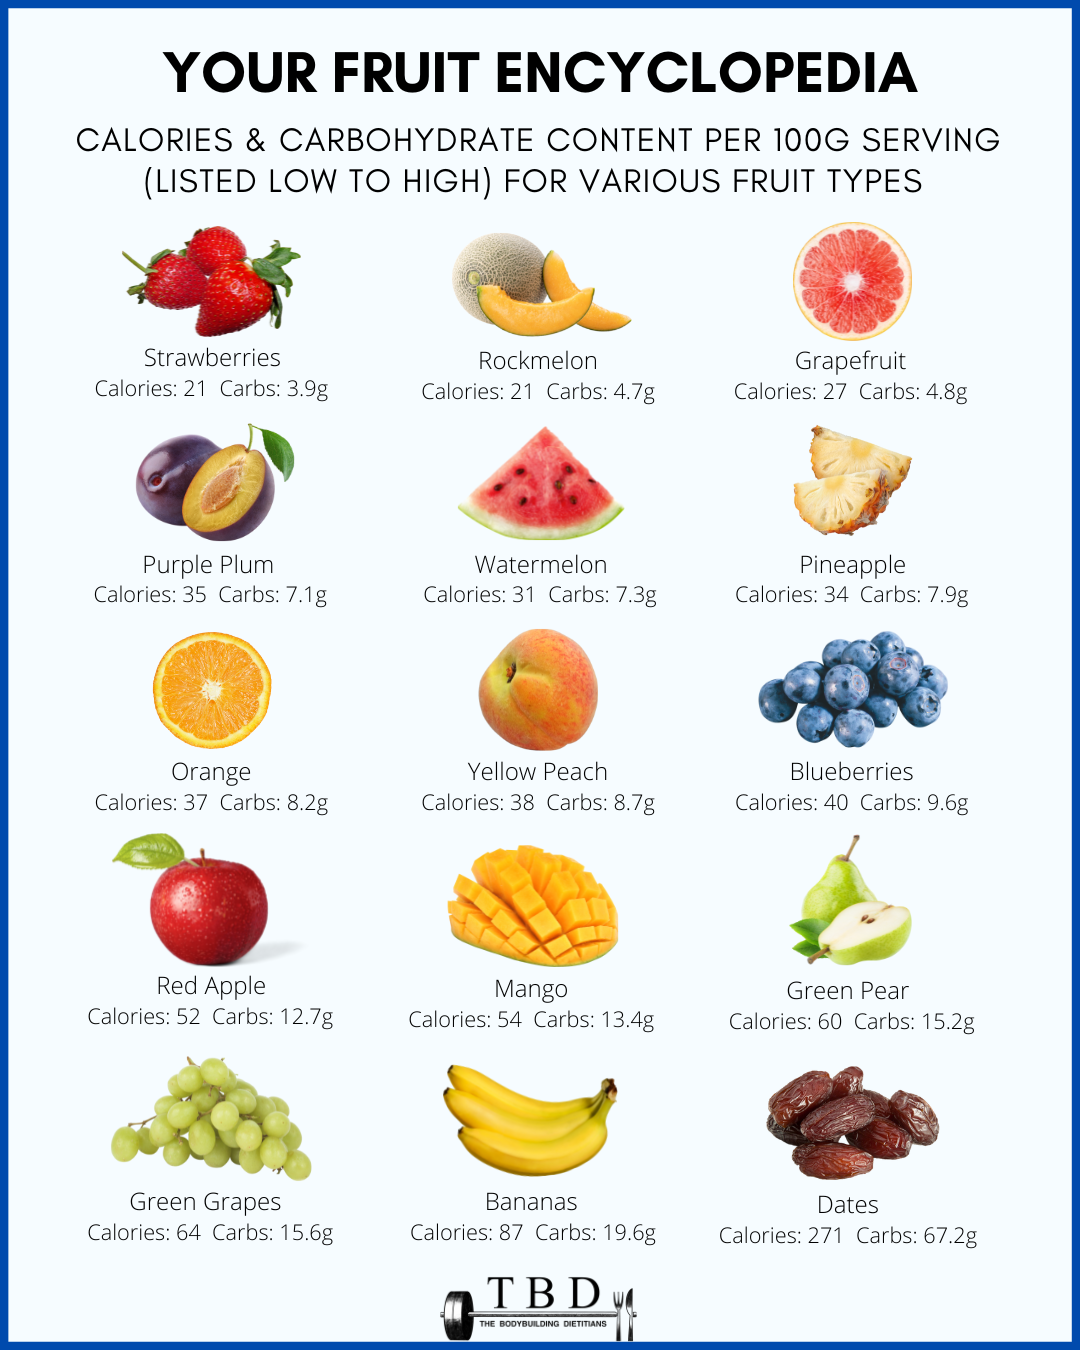 low-carb-and-high-carb-fruits-ranked-per-100g-serving-the-bodybuilding-dietitians